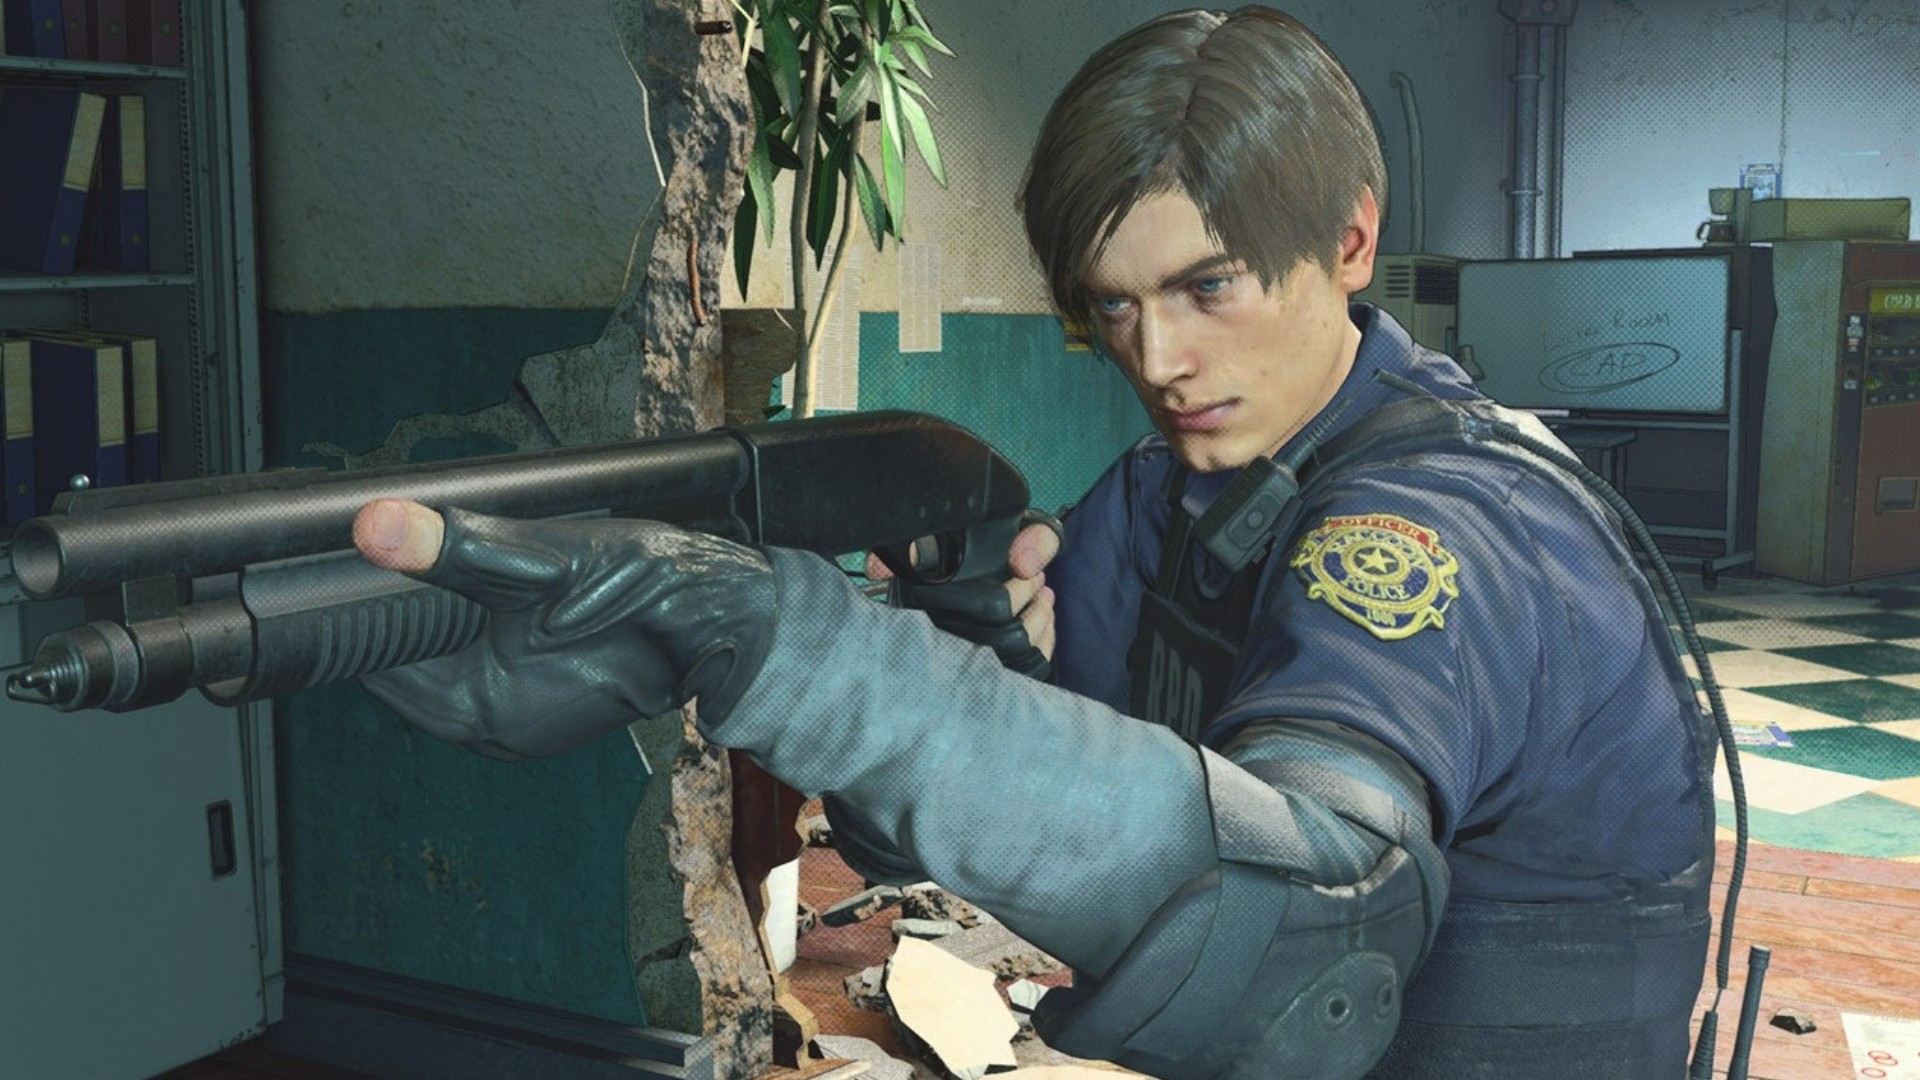 Resident Evil Re:Verse has less Steam players than Resident Evil 2002